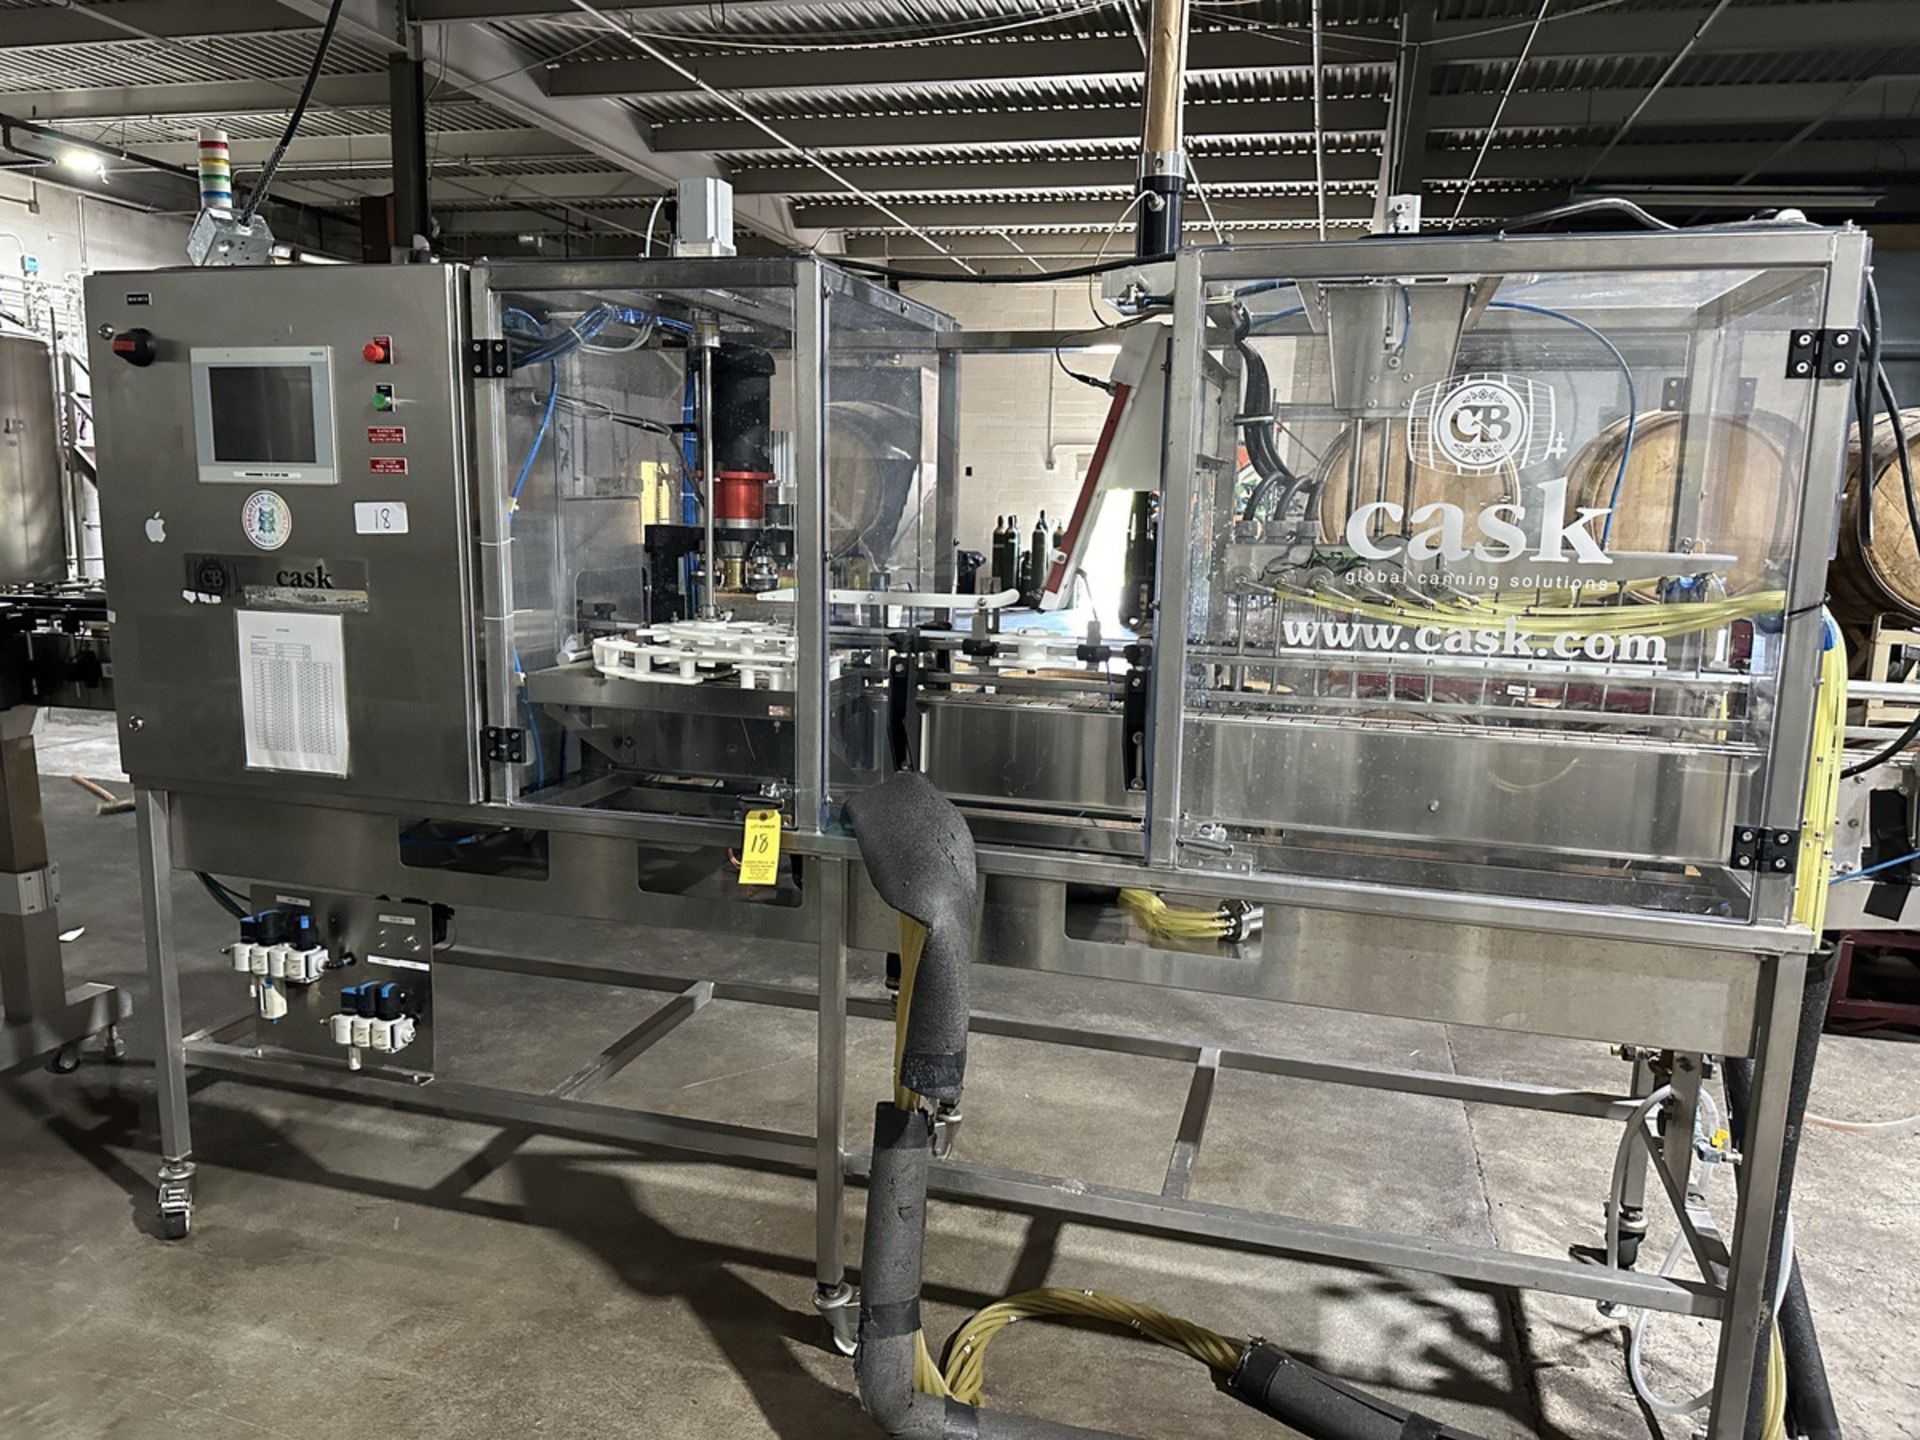 2019 Cask Model ACS-VS 6-Head Canning Line, Single Head Seamer, with Depalletizer, | Rig Fee $1500 - Image 2 of 12